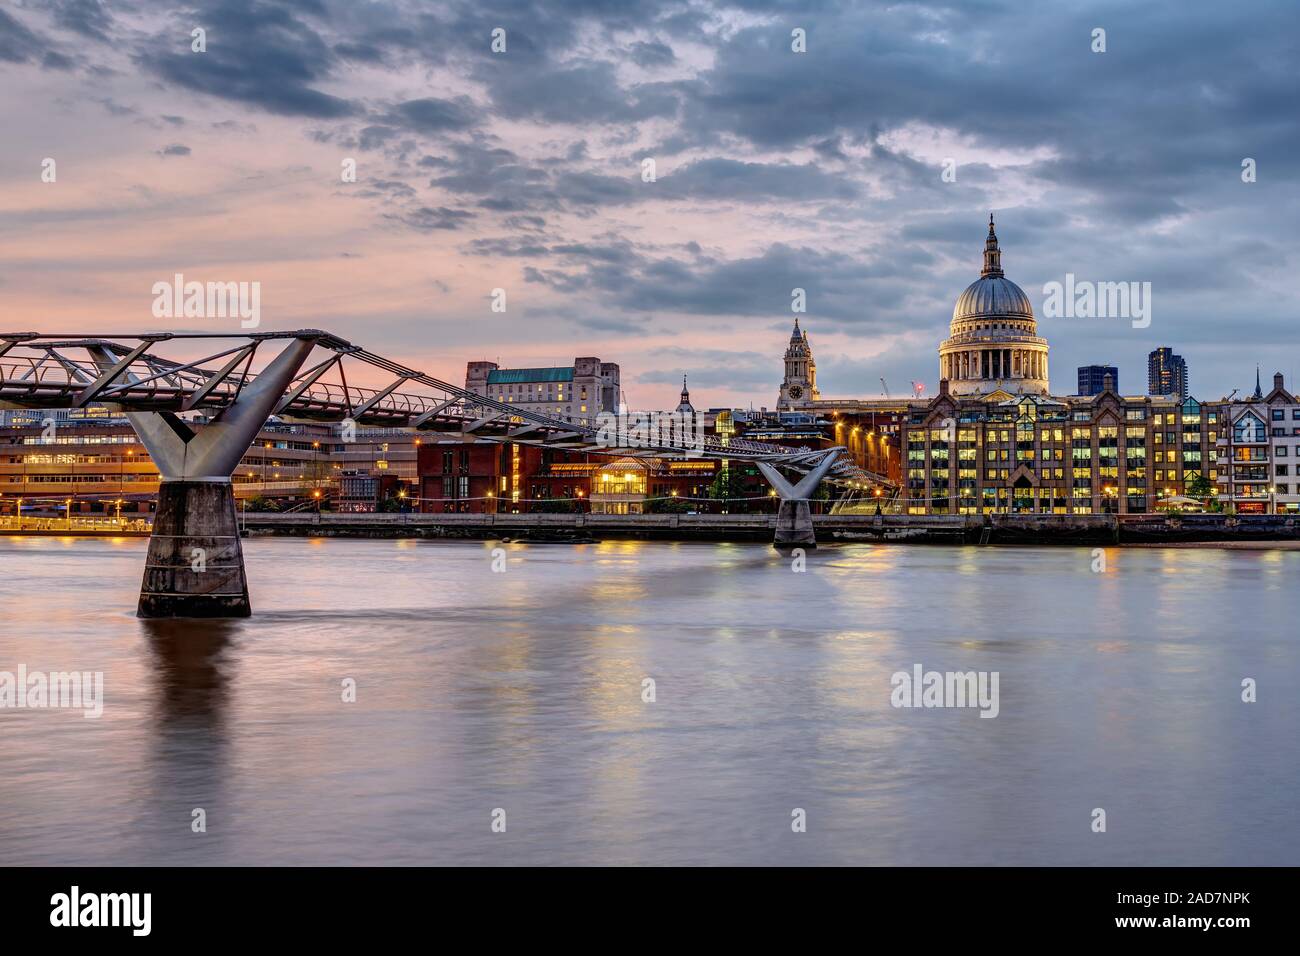 The Millennium Bridge and St. Paul's cathedral in London, UK, at sunset Stock Photo